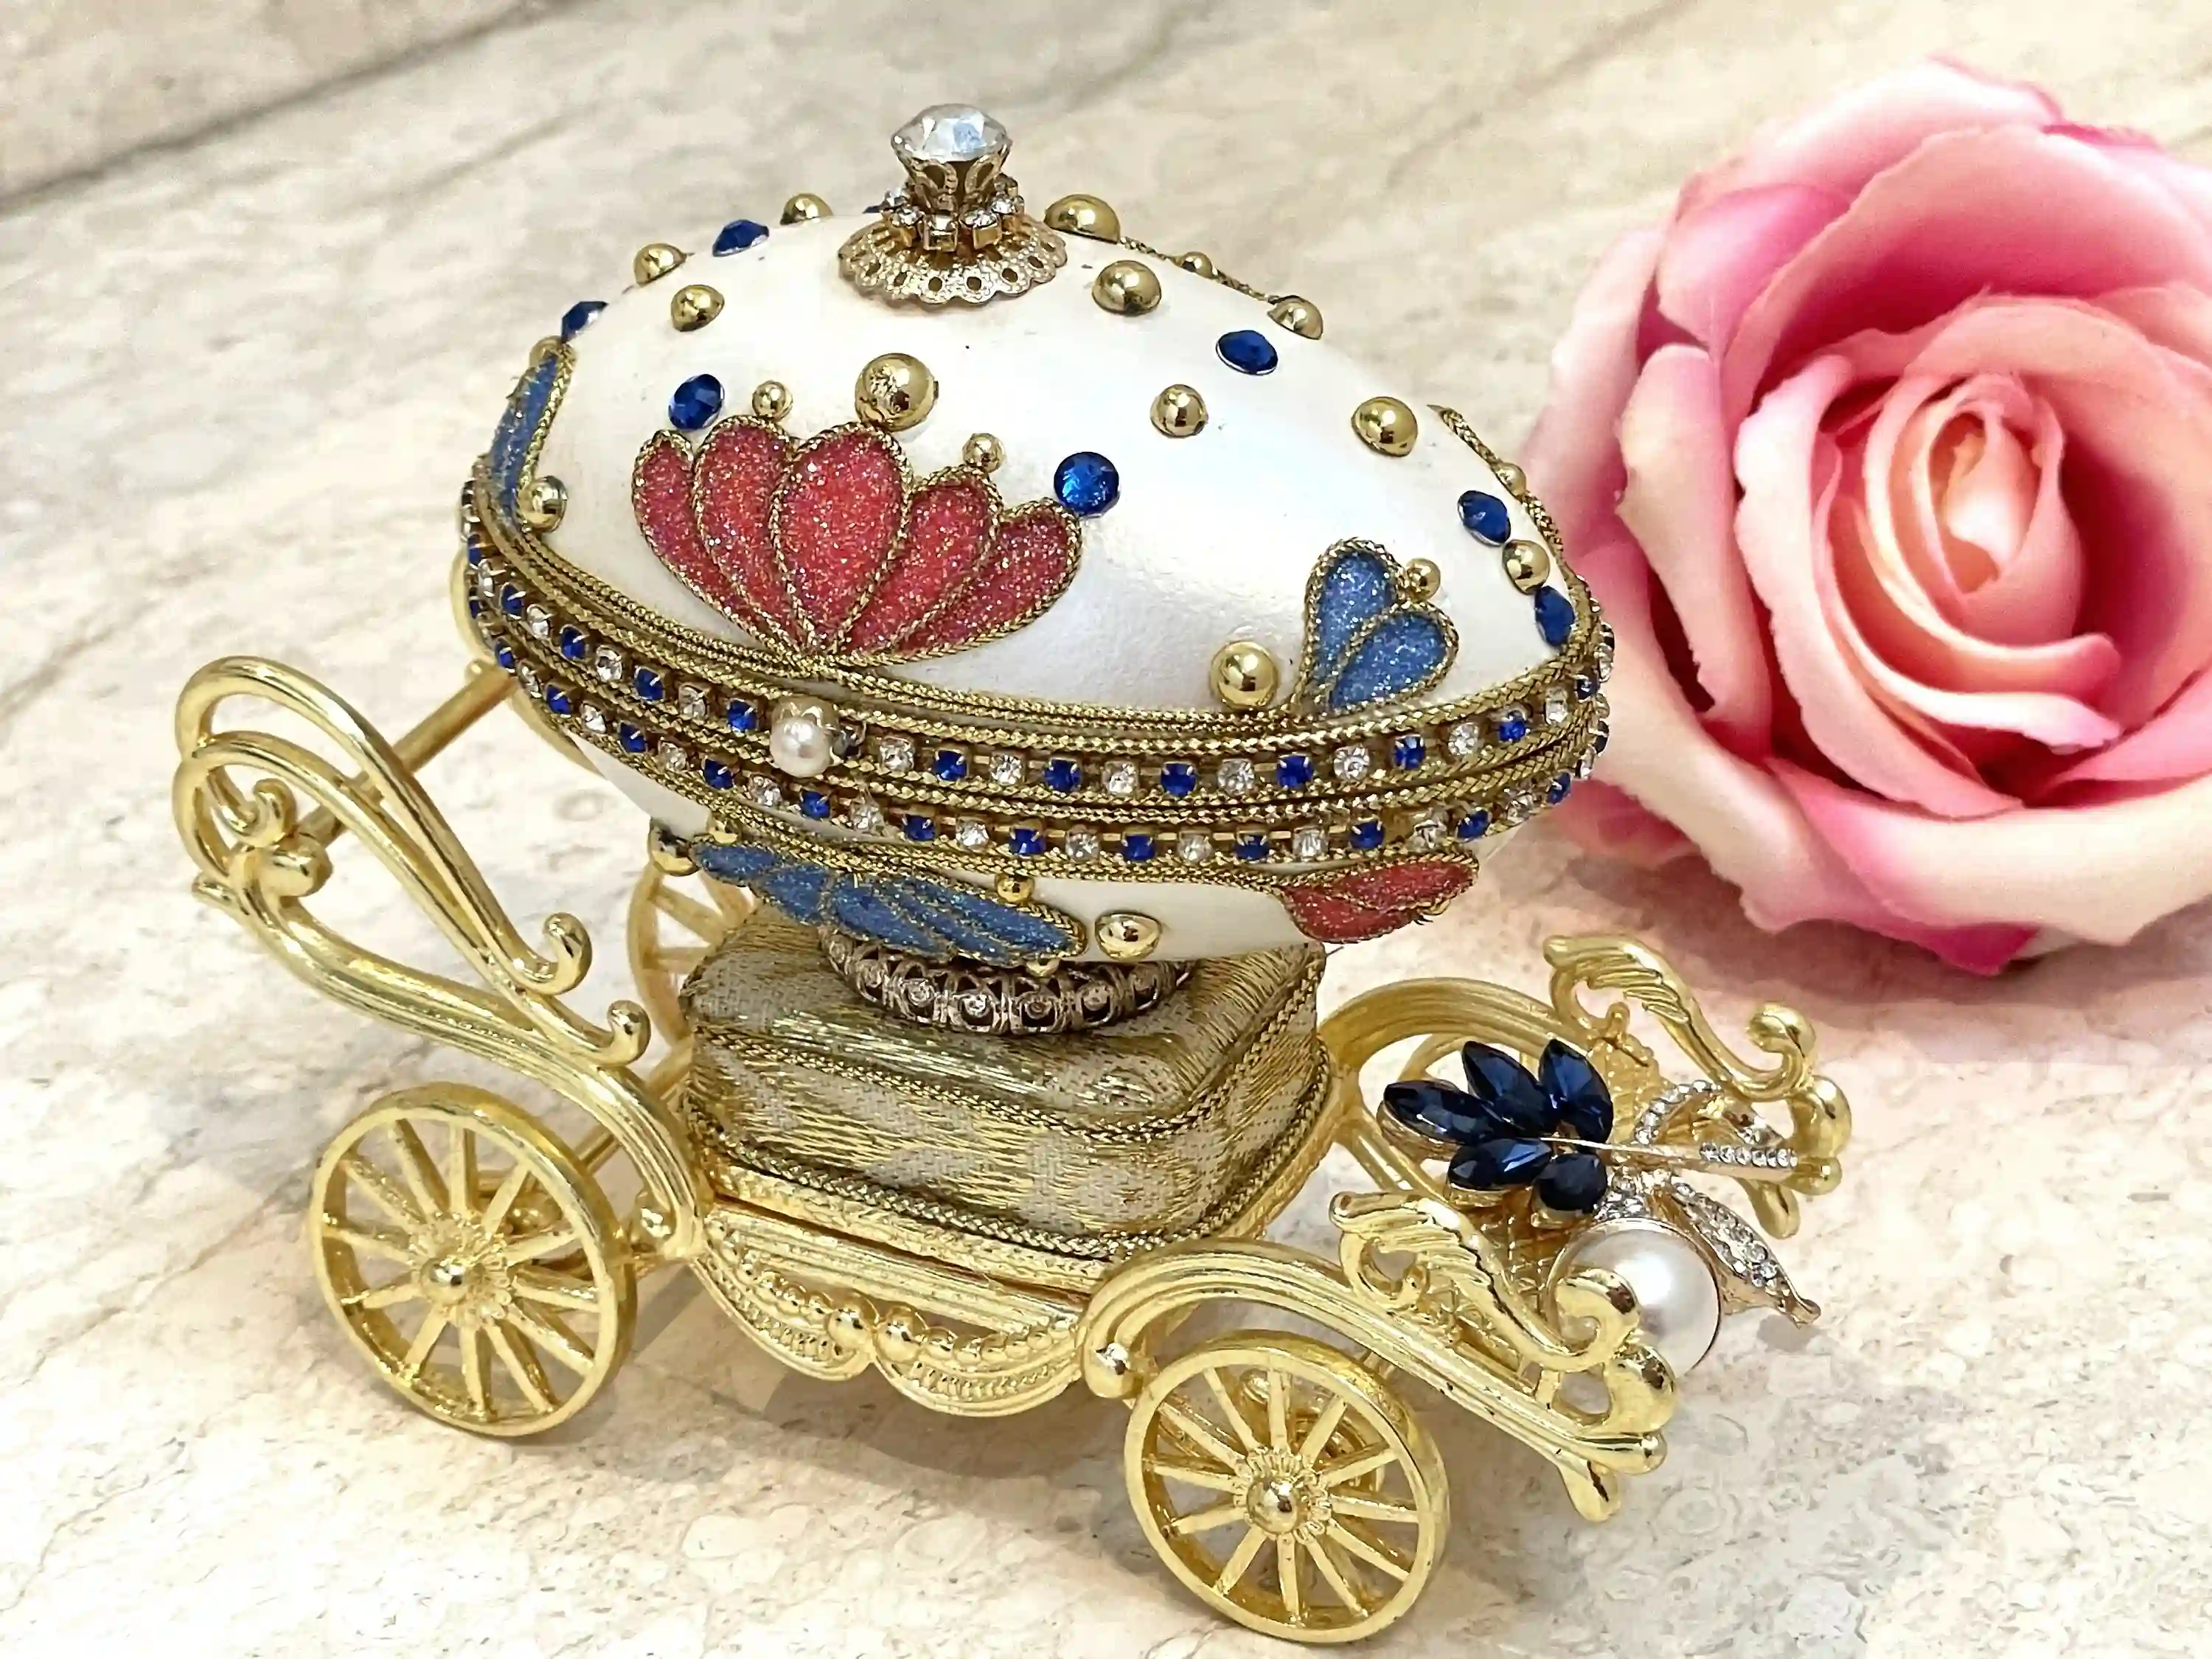 1994 One of A KIND Pearl Clam Imperial Faberge Egg MUSIC Box 30th Wedding Anniversary gift for wife Faberge style Egg Mother New Beginnings 